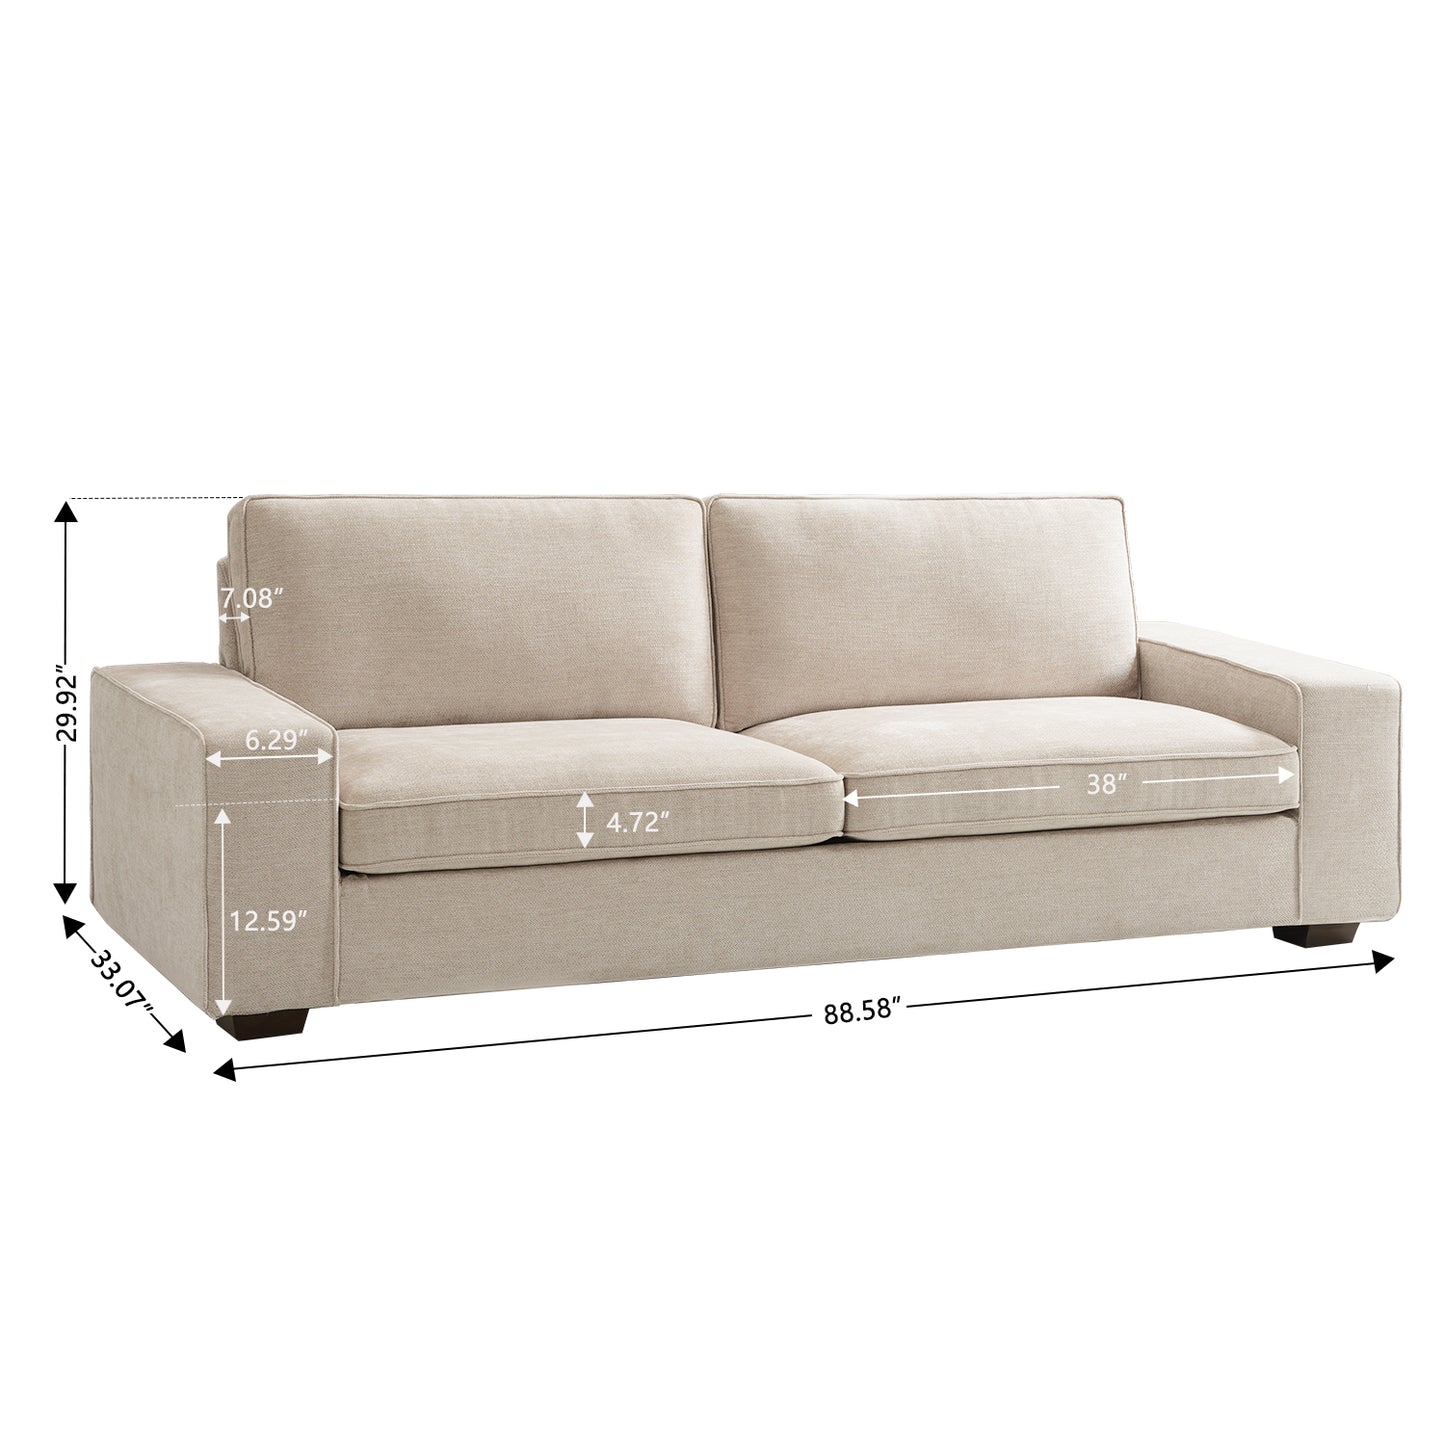 3-Seat Sofa 88.58",Soft and Comfortable,Apartments Small Sofa, Suitable for Living Room, Bedroom,Removable Back Cushion and Easy toolSuitable